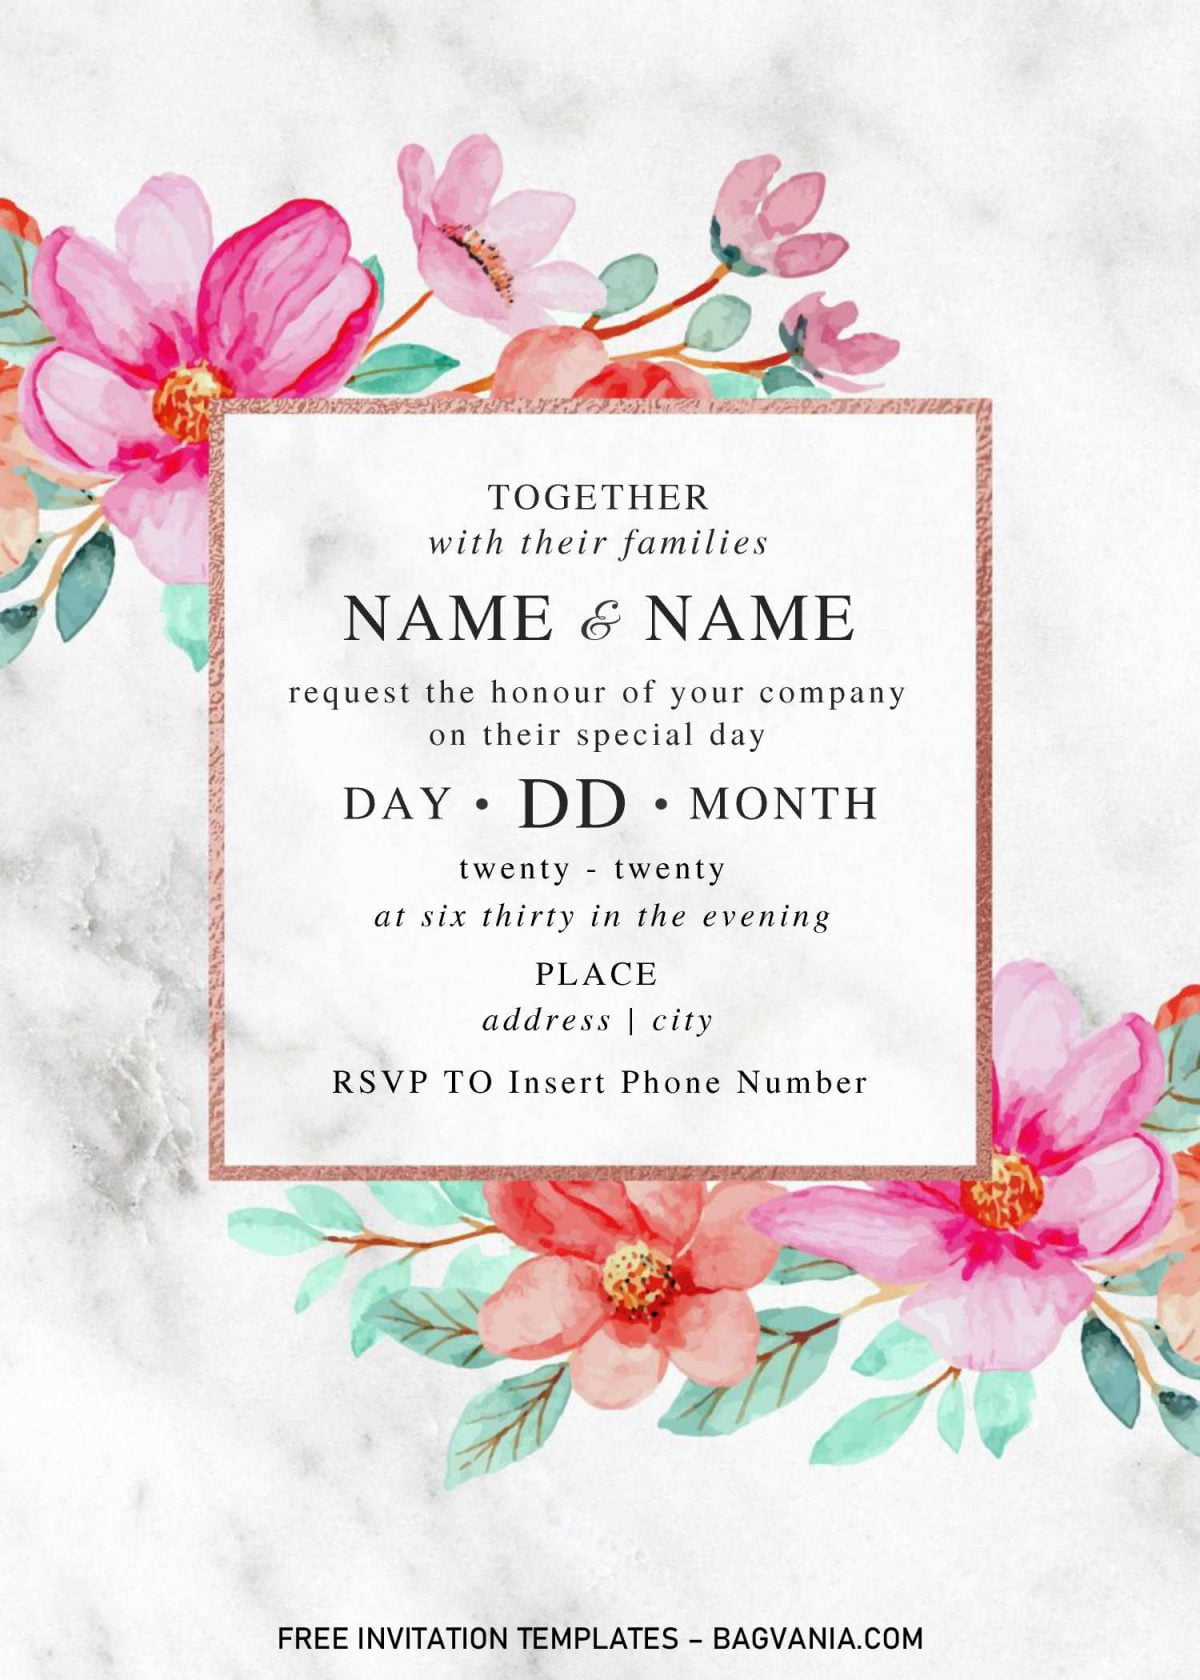 Festive Floral Wedding Invitation Templates - Editable With Microsoft Word and has blush pink roses